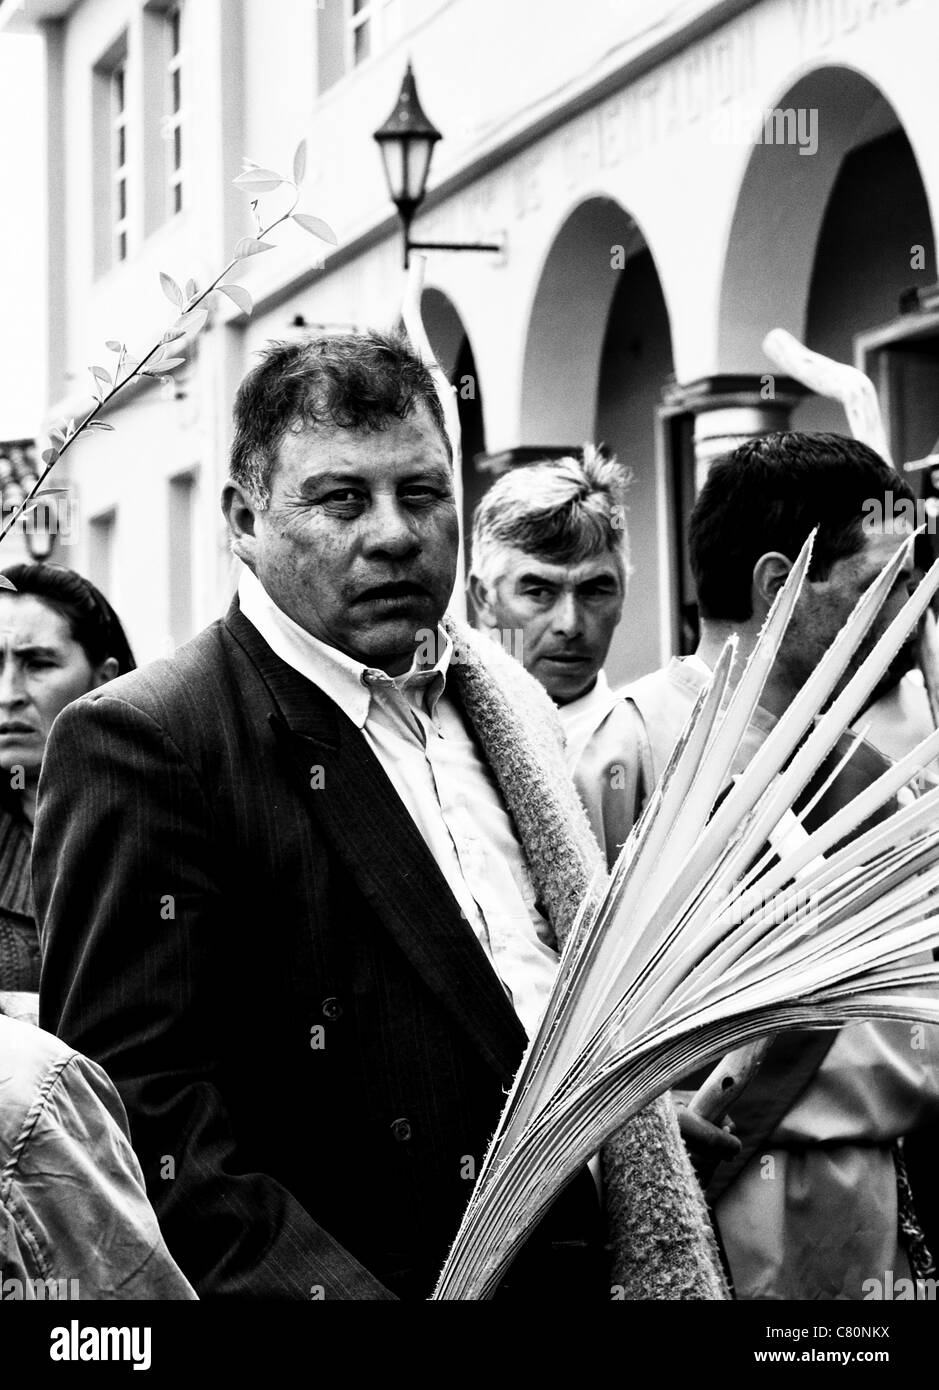 Men during a religious procession during Easter holidays. Nobsa, Boyacá, Colombia, South America, Andes region Stock Photo